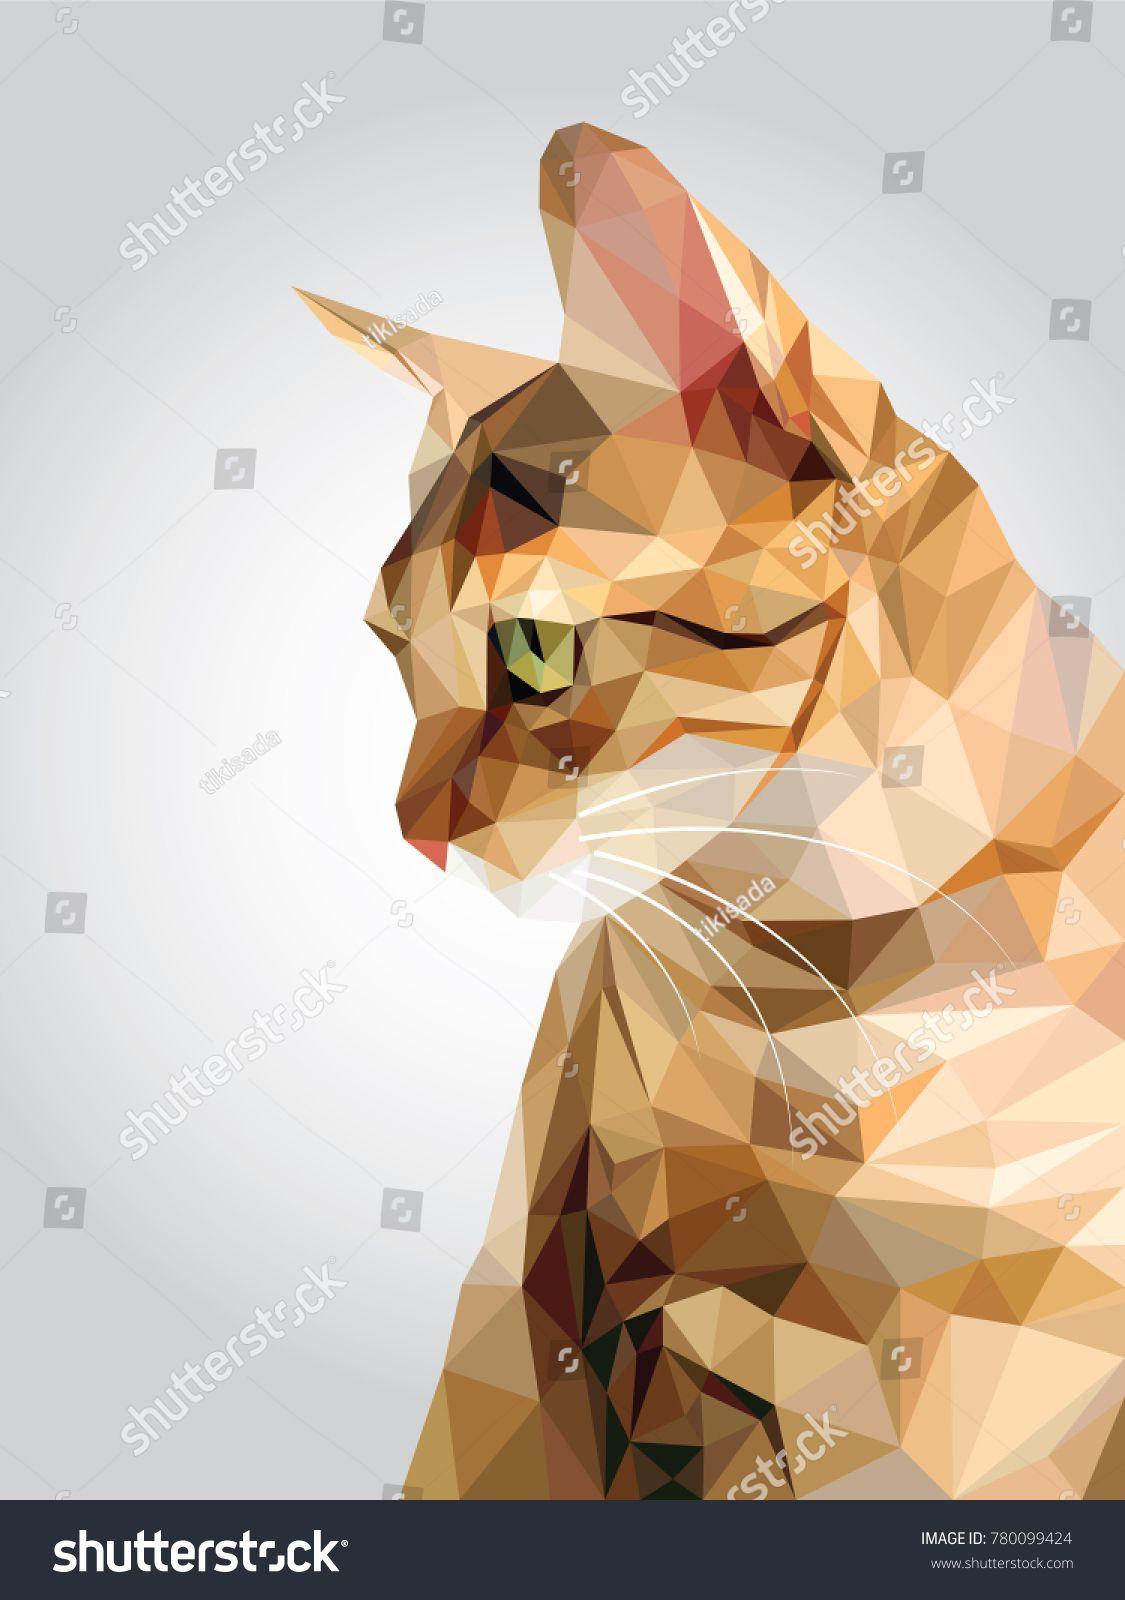 Animal with a Red and White Triangle Logo - Tabby brown cat green eyes isolated on white background, red orange ...